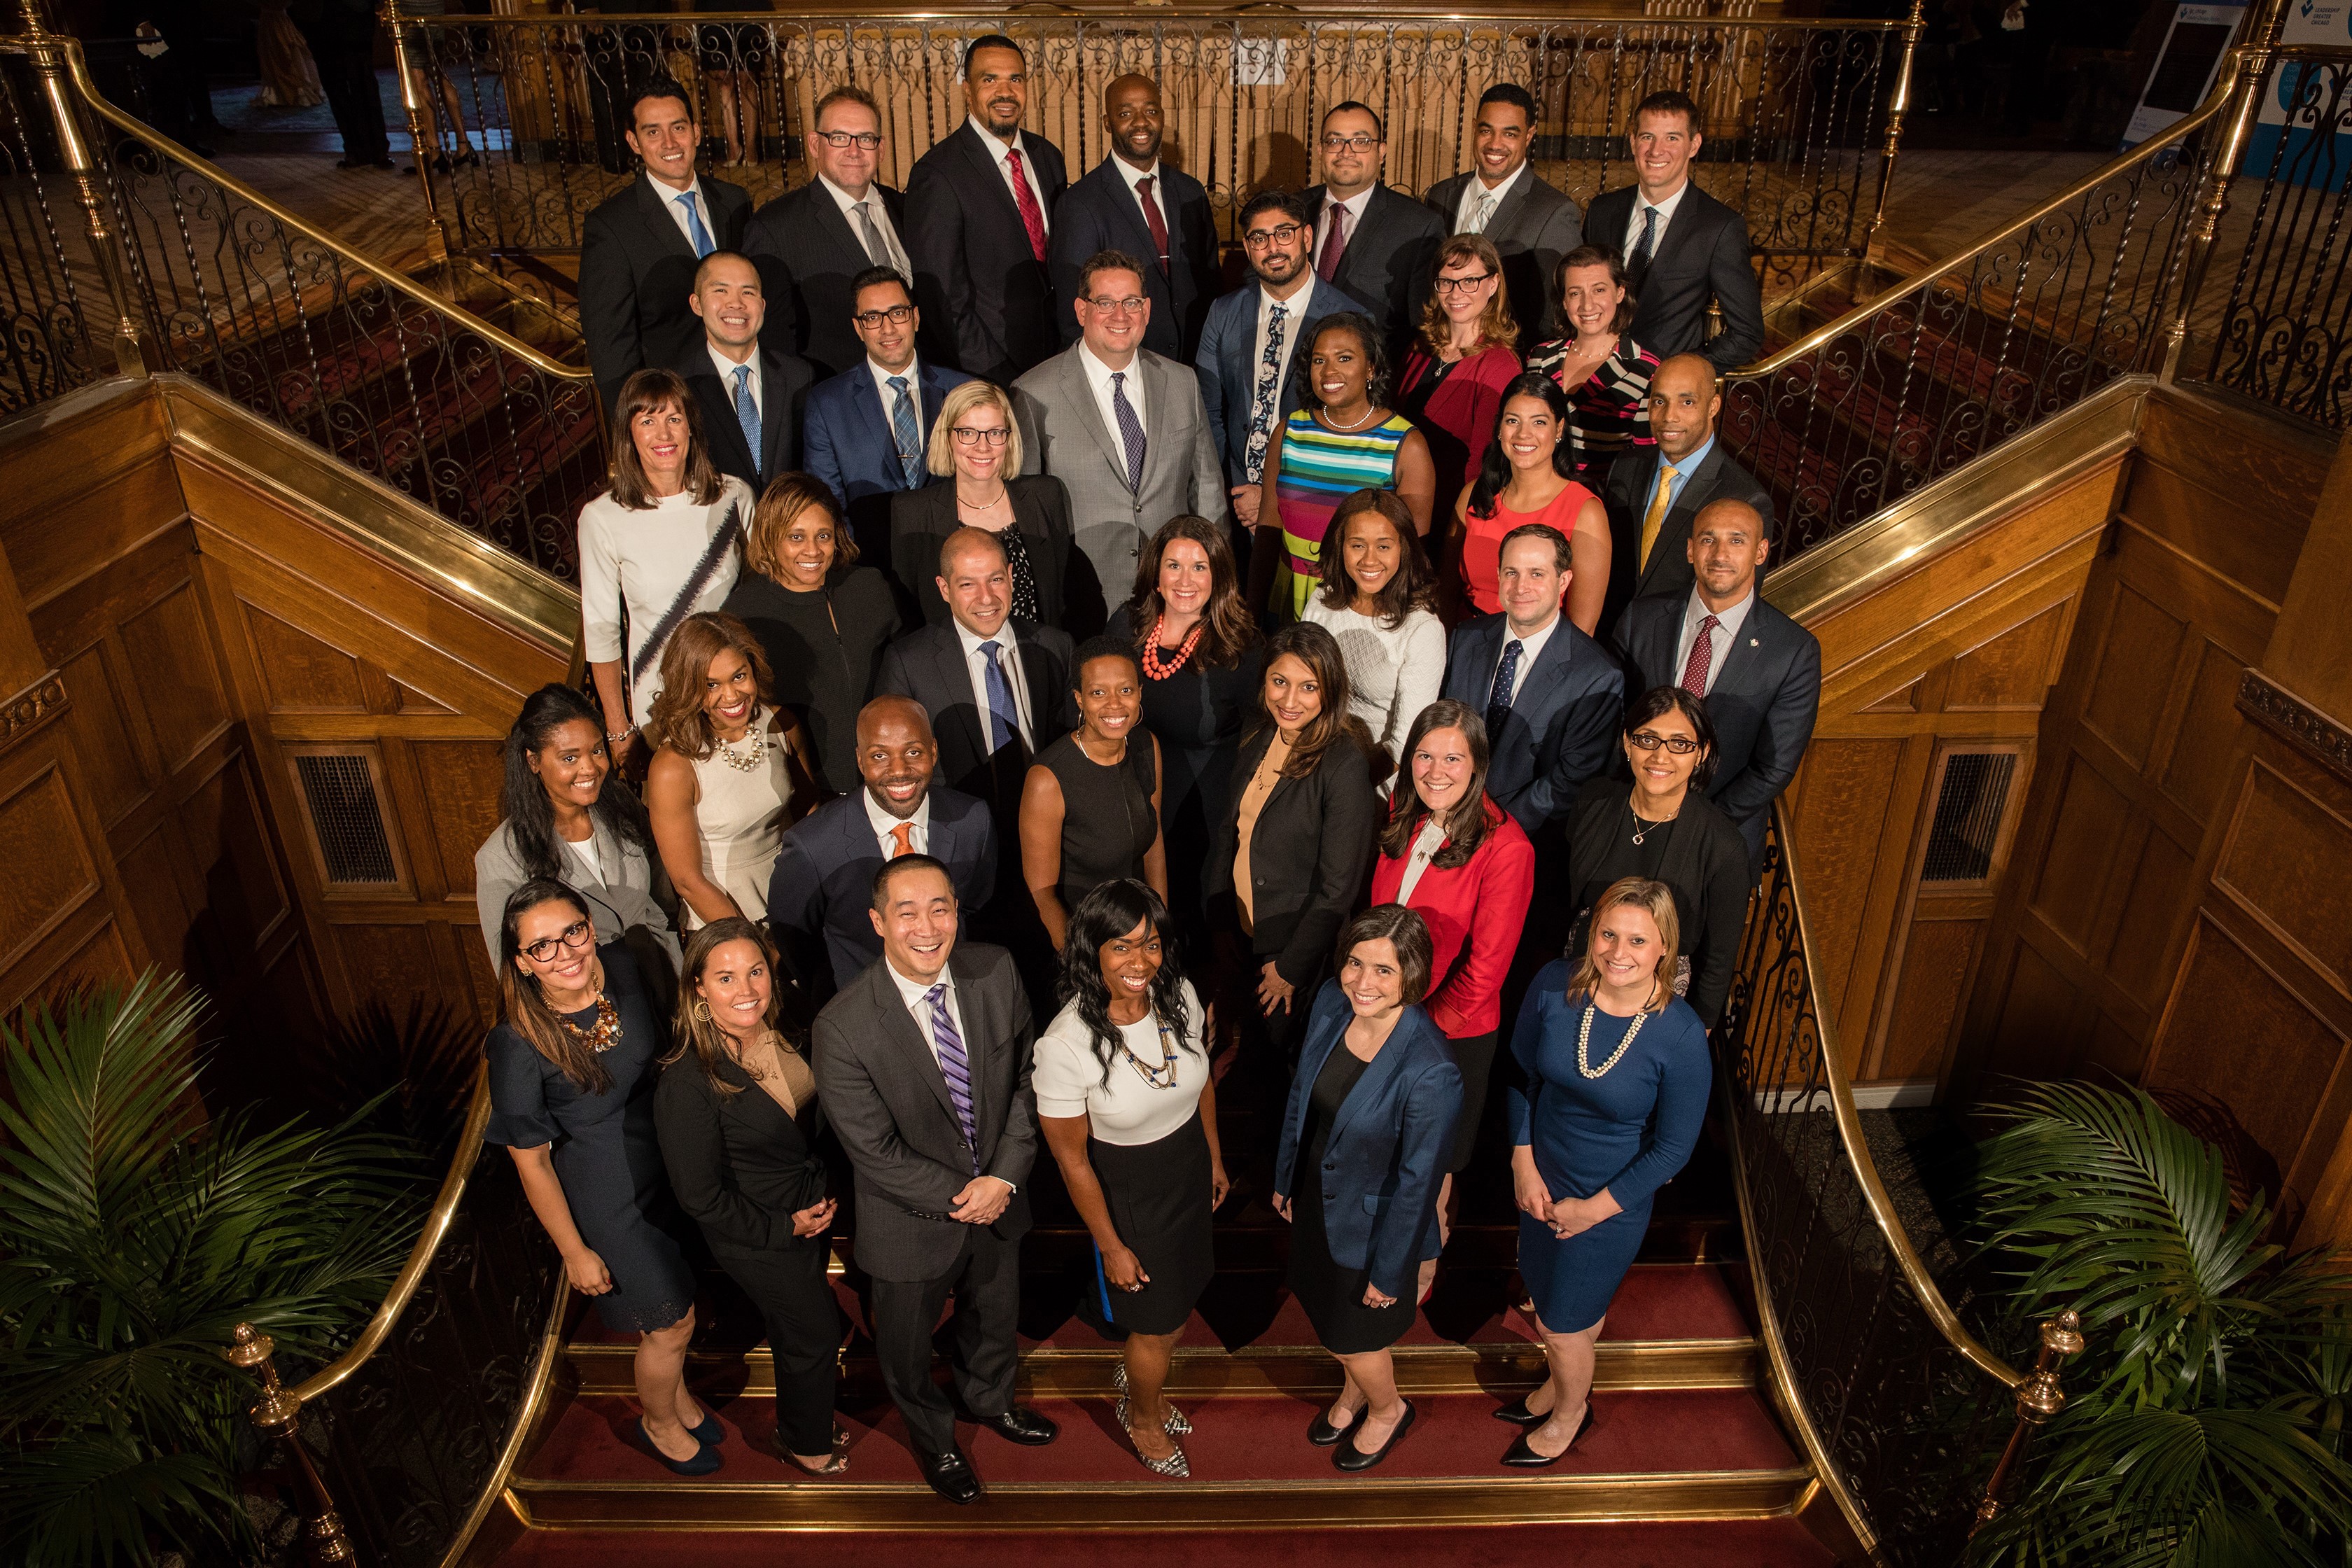 Group photo of the Class of 2018 Fellows